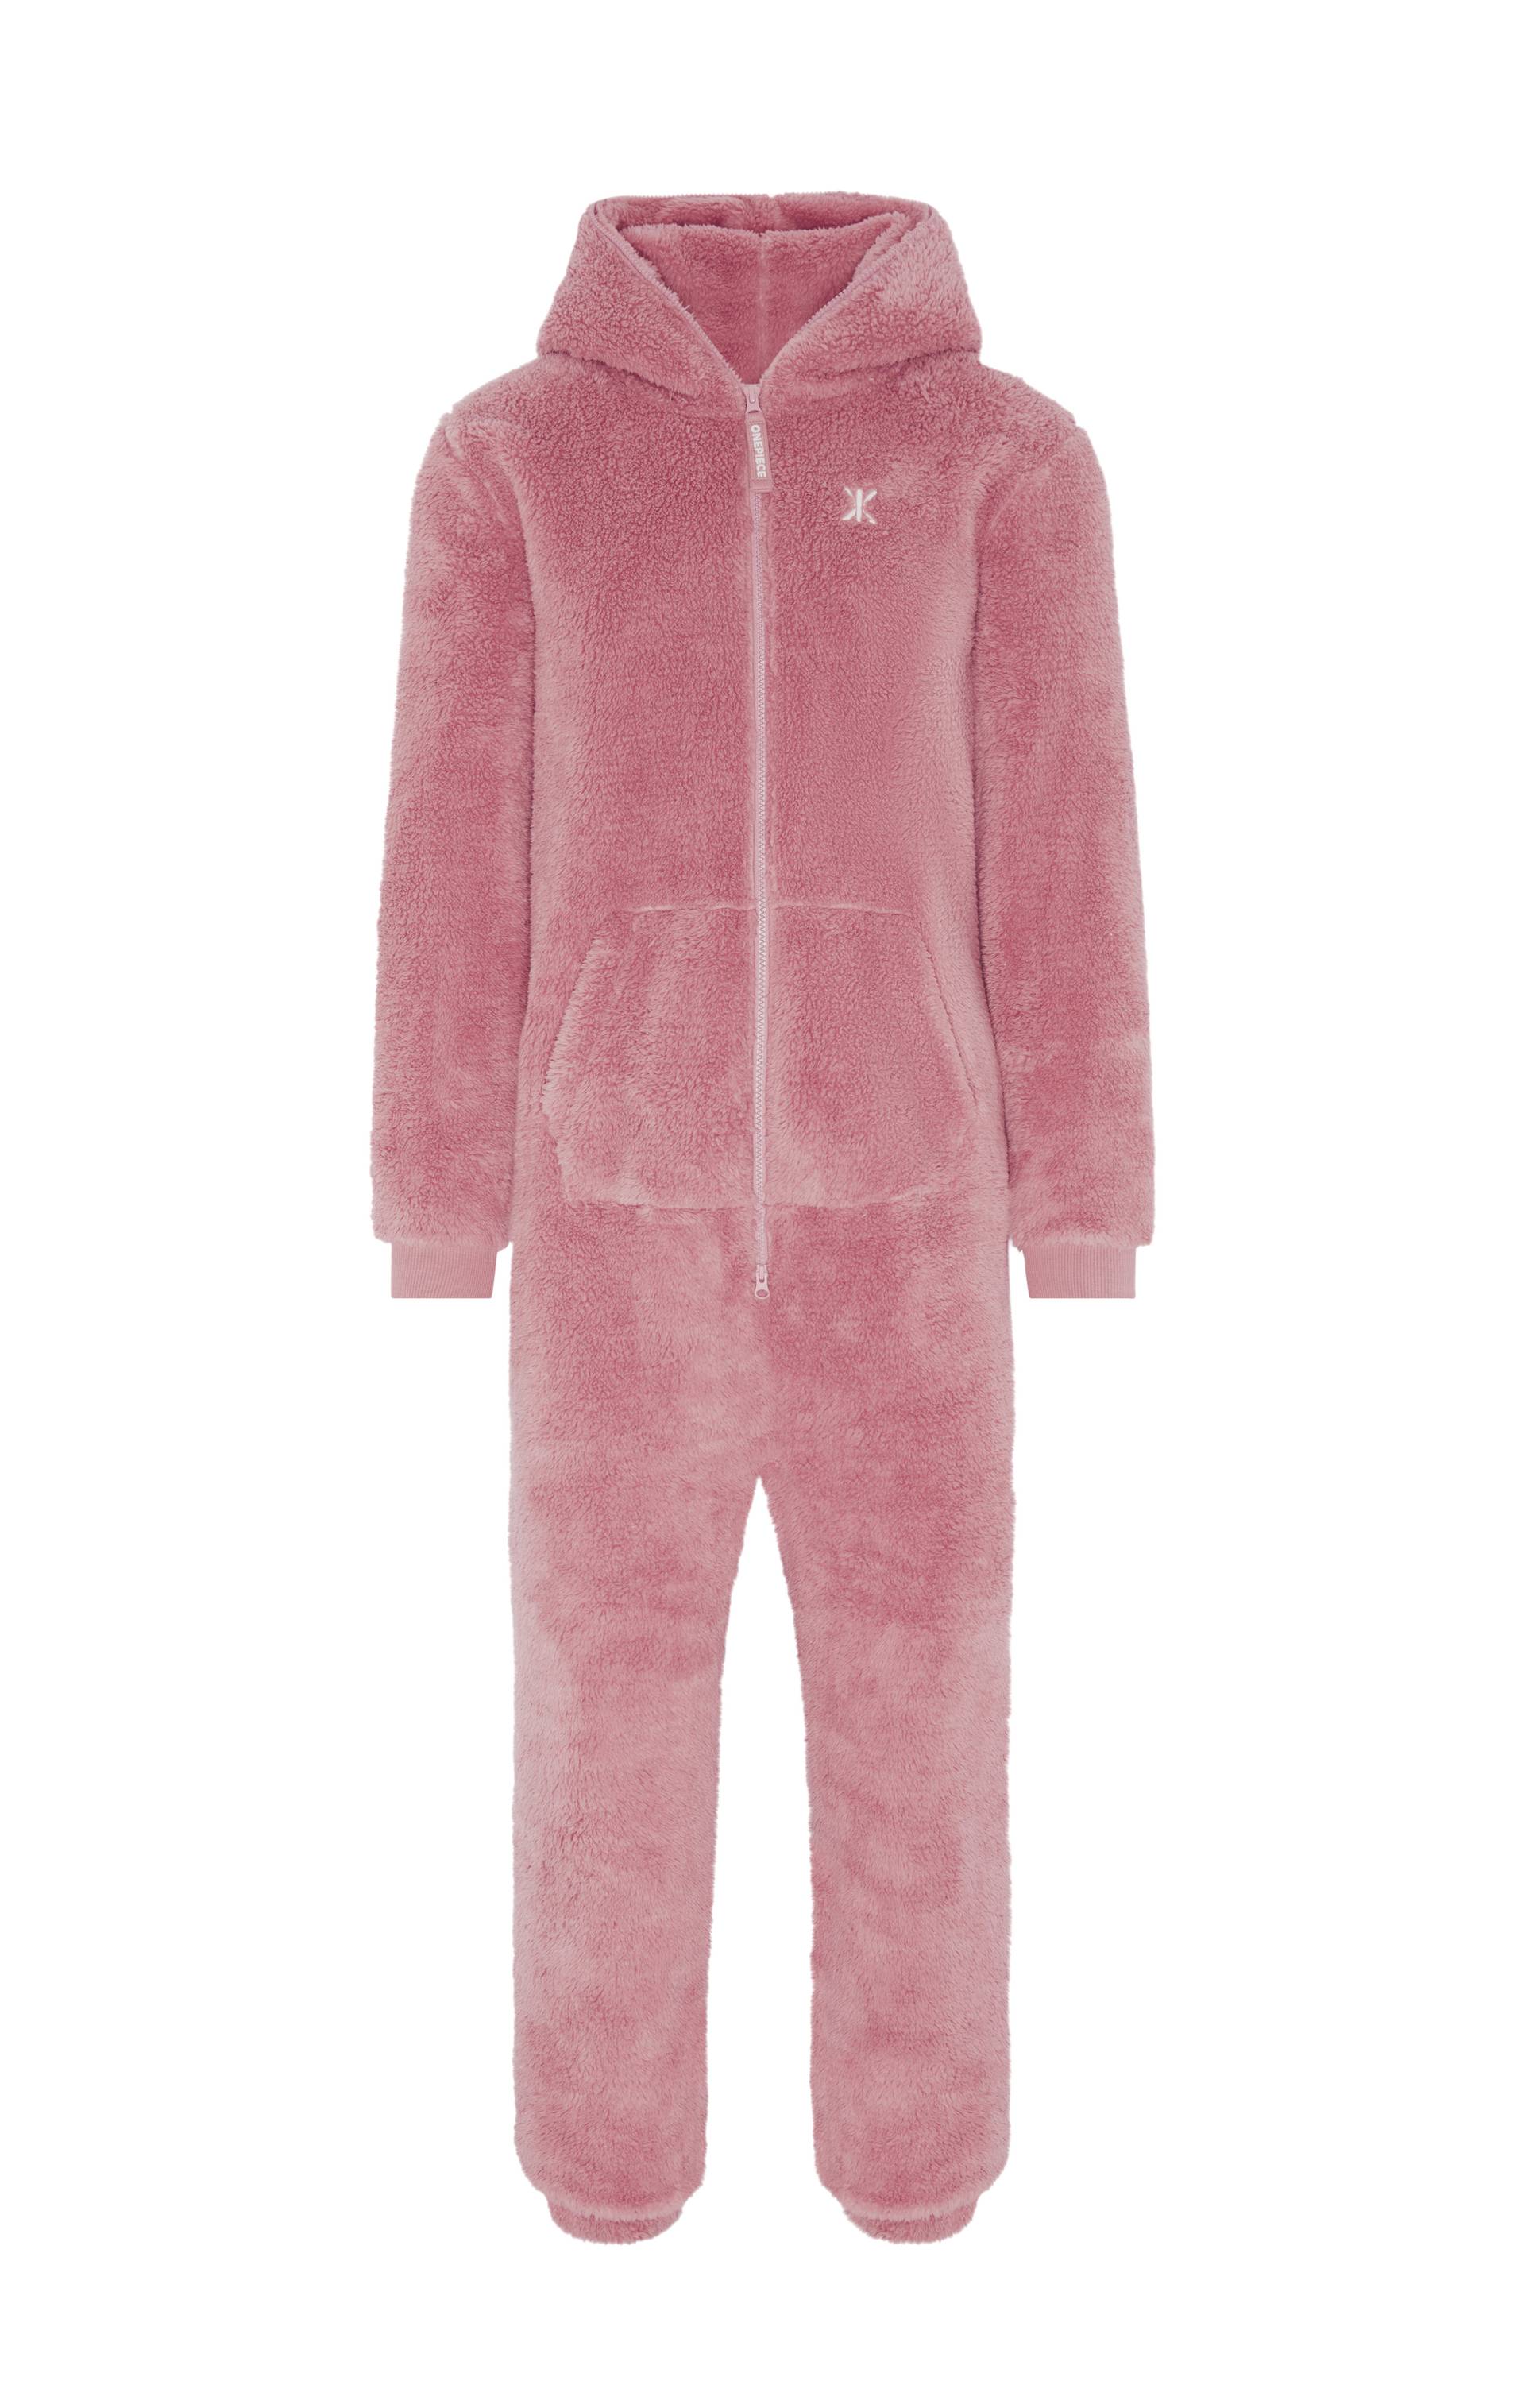 Onepiece The Puppy Jumpsuit Pink - 1